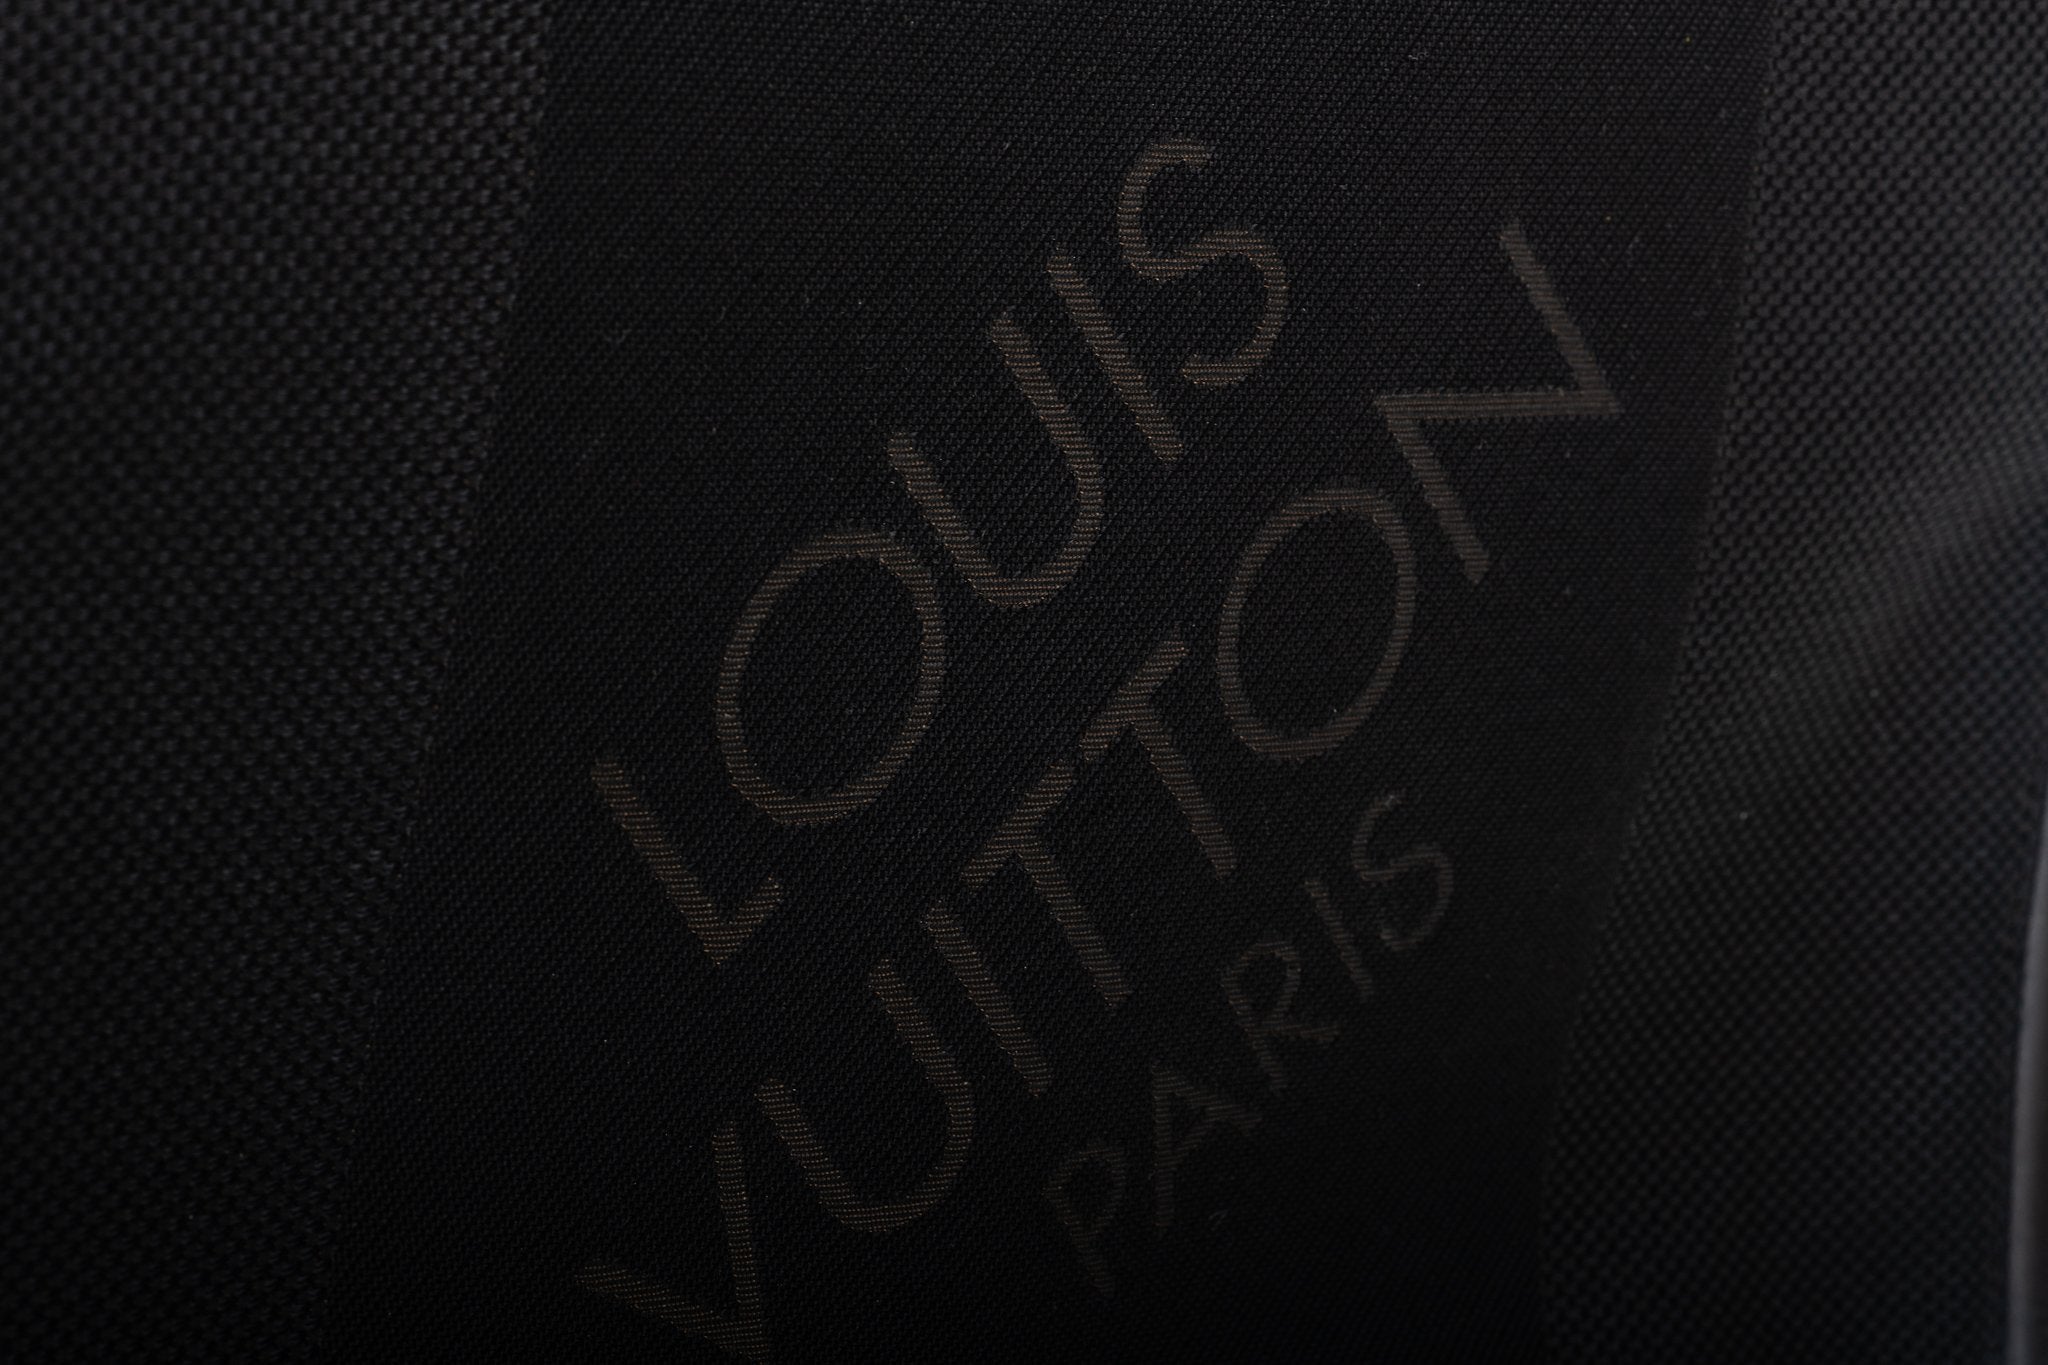 Look at that, not the guy but the computer bag, Its made by Louis vutton  and it is sharp even if its for…